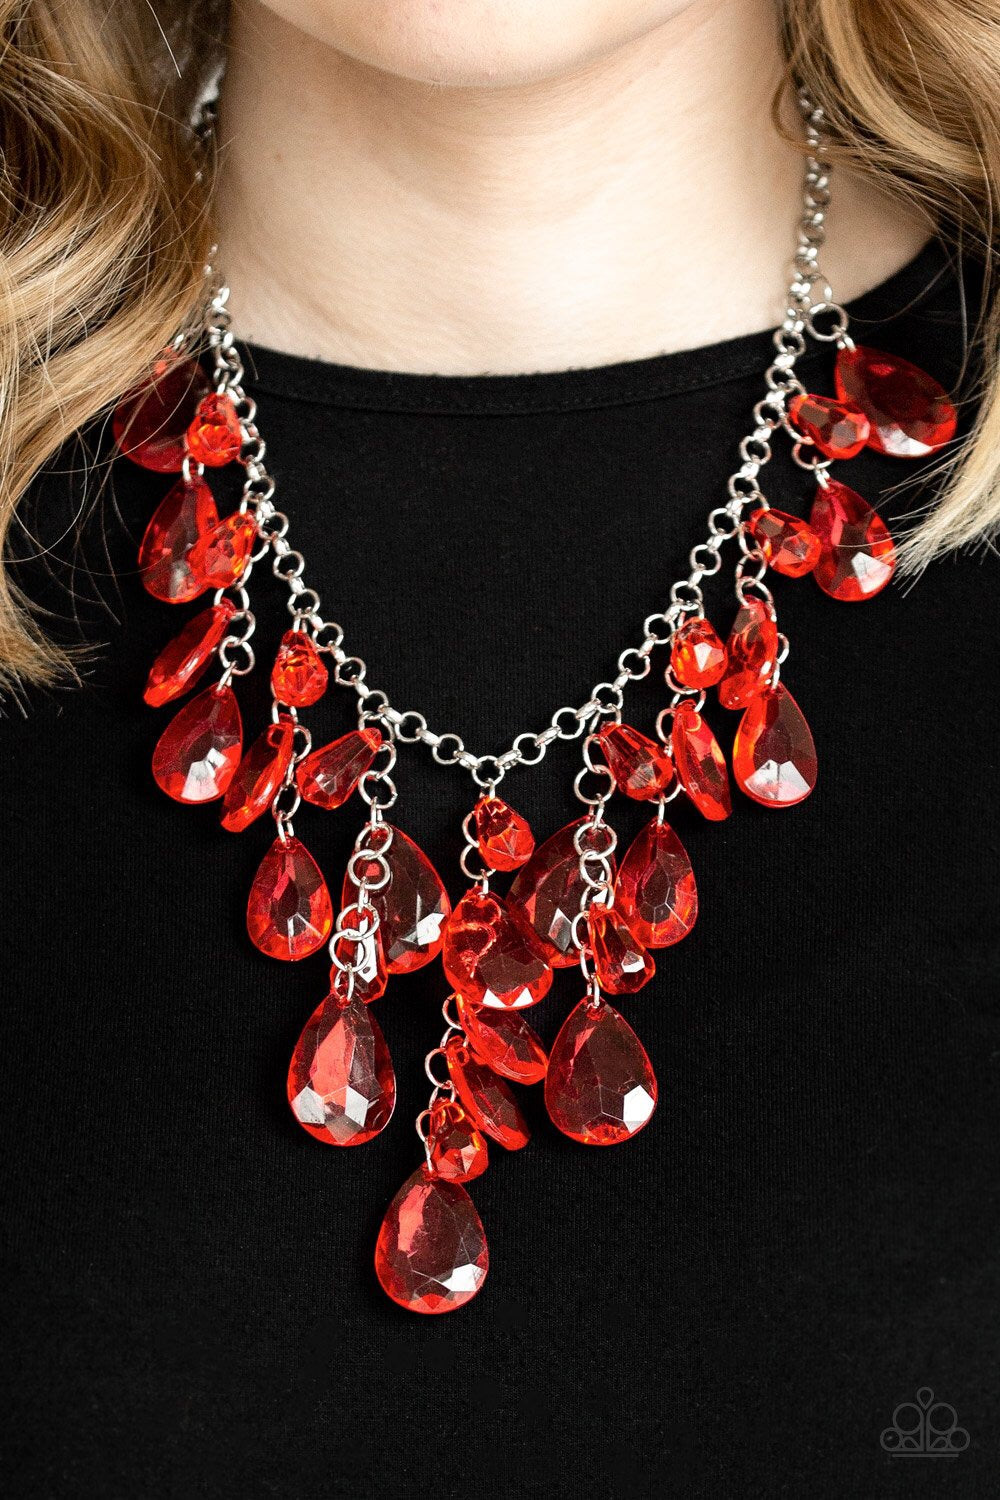 Irresistible Iridescence Red-Necklace